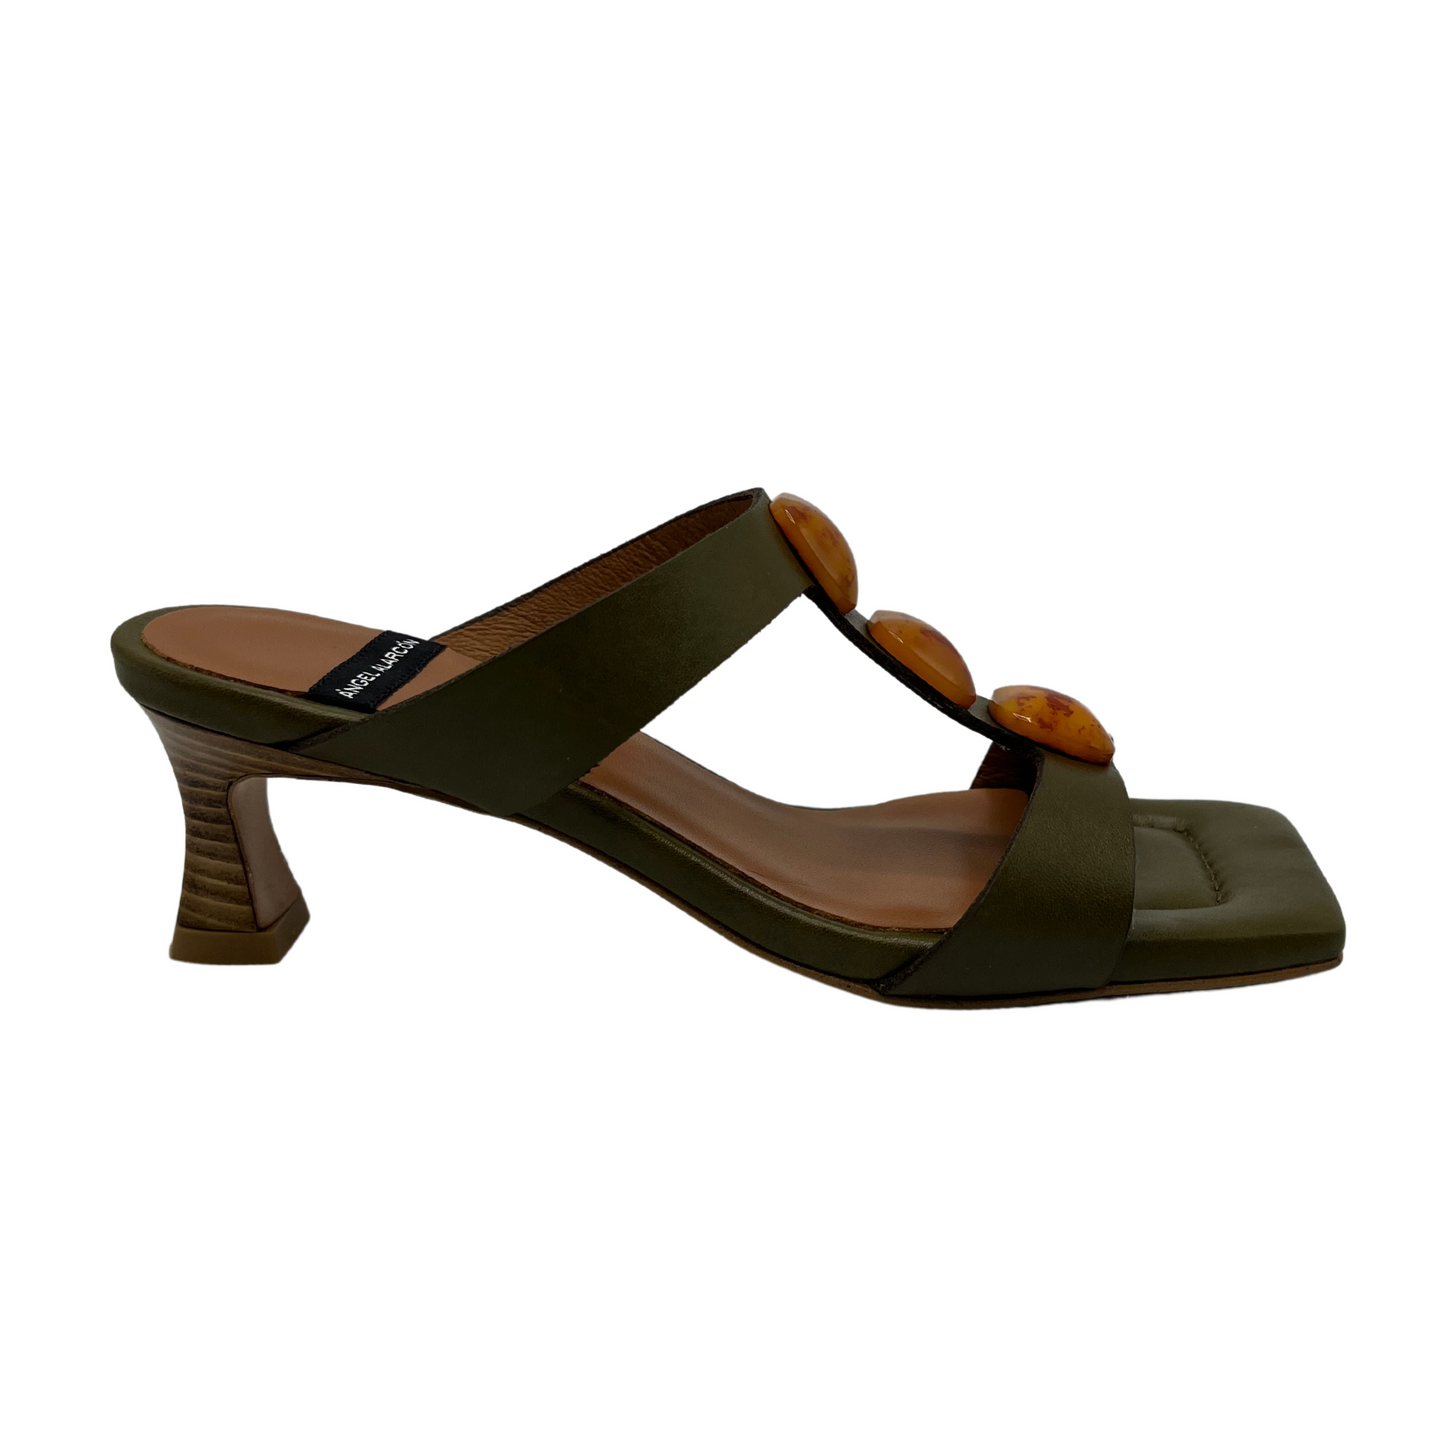 Right facing view of khaki leather sandal with square toe and square ornaments on upper. Flared heel and padded insole.